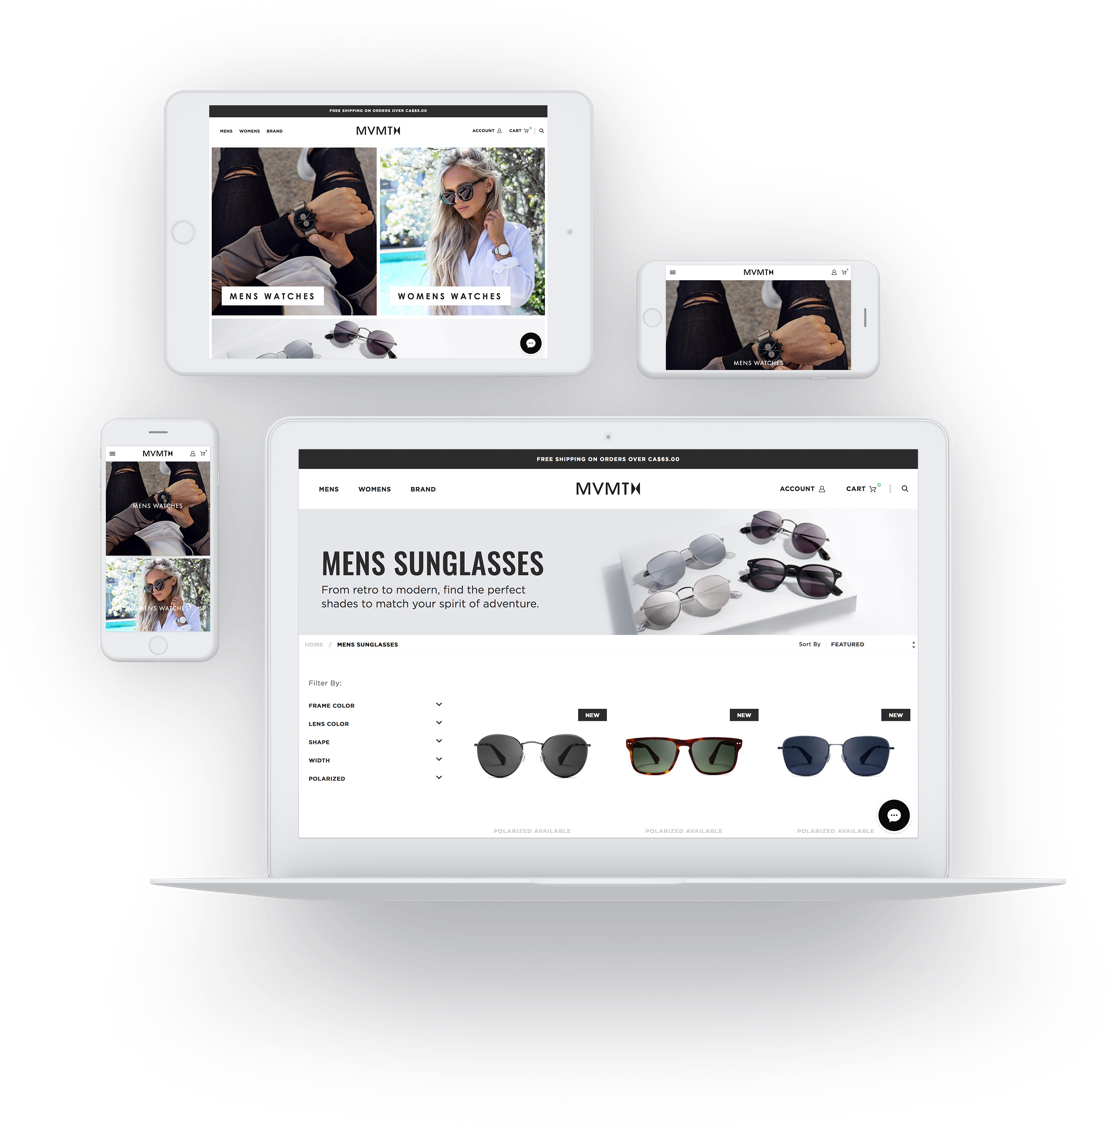 Shopify Plus Software - Optimize the website to drive sales by customizing its look and feel across devices